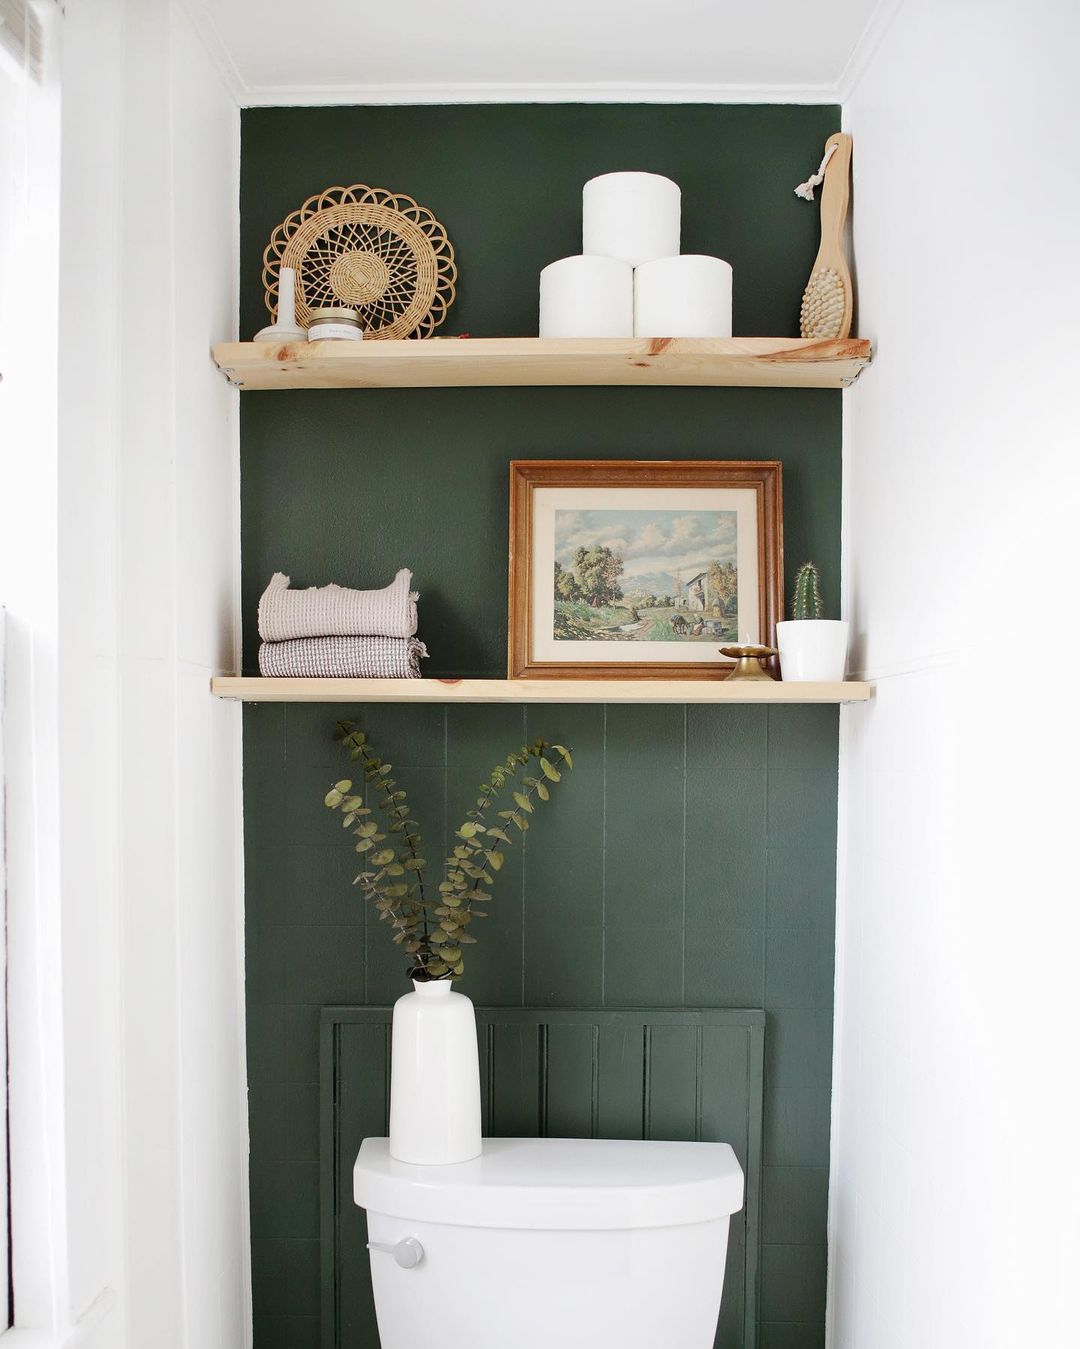 Rustic and Classic Floating Shelves